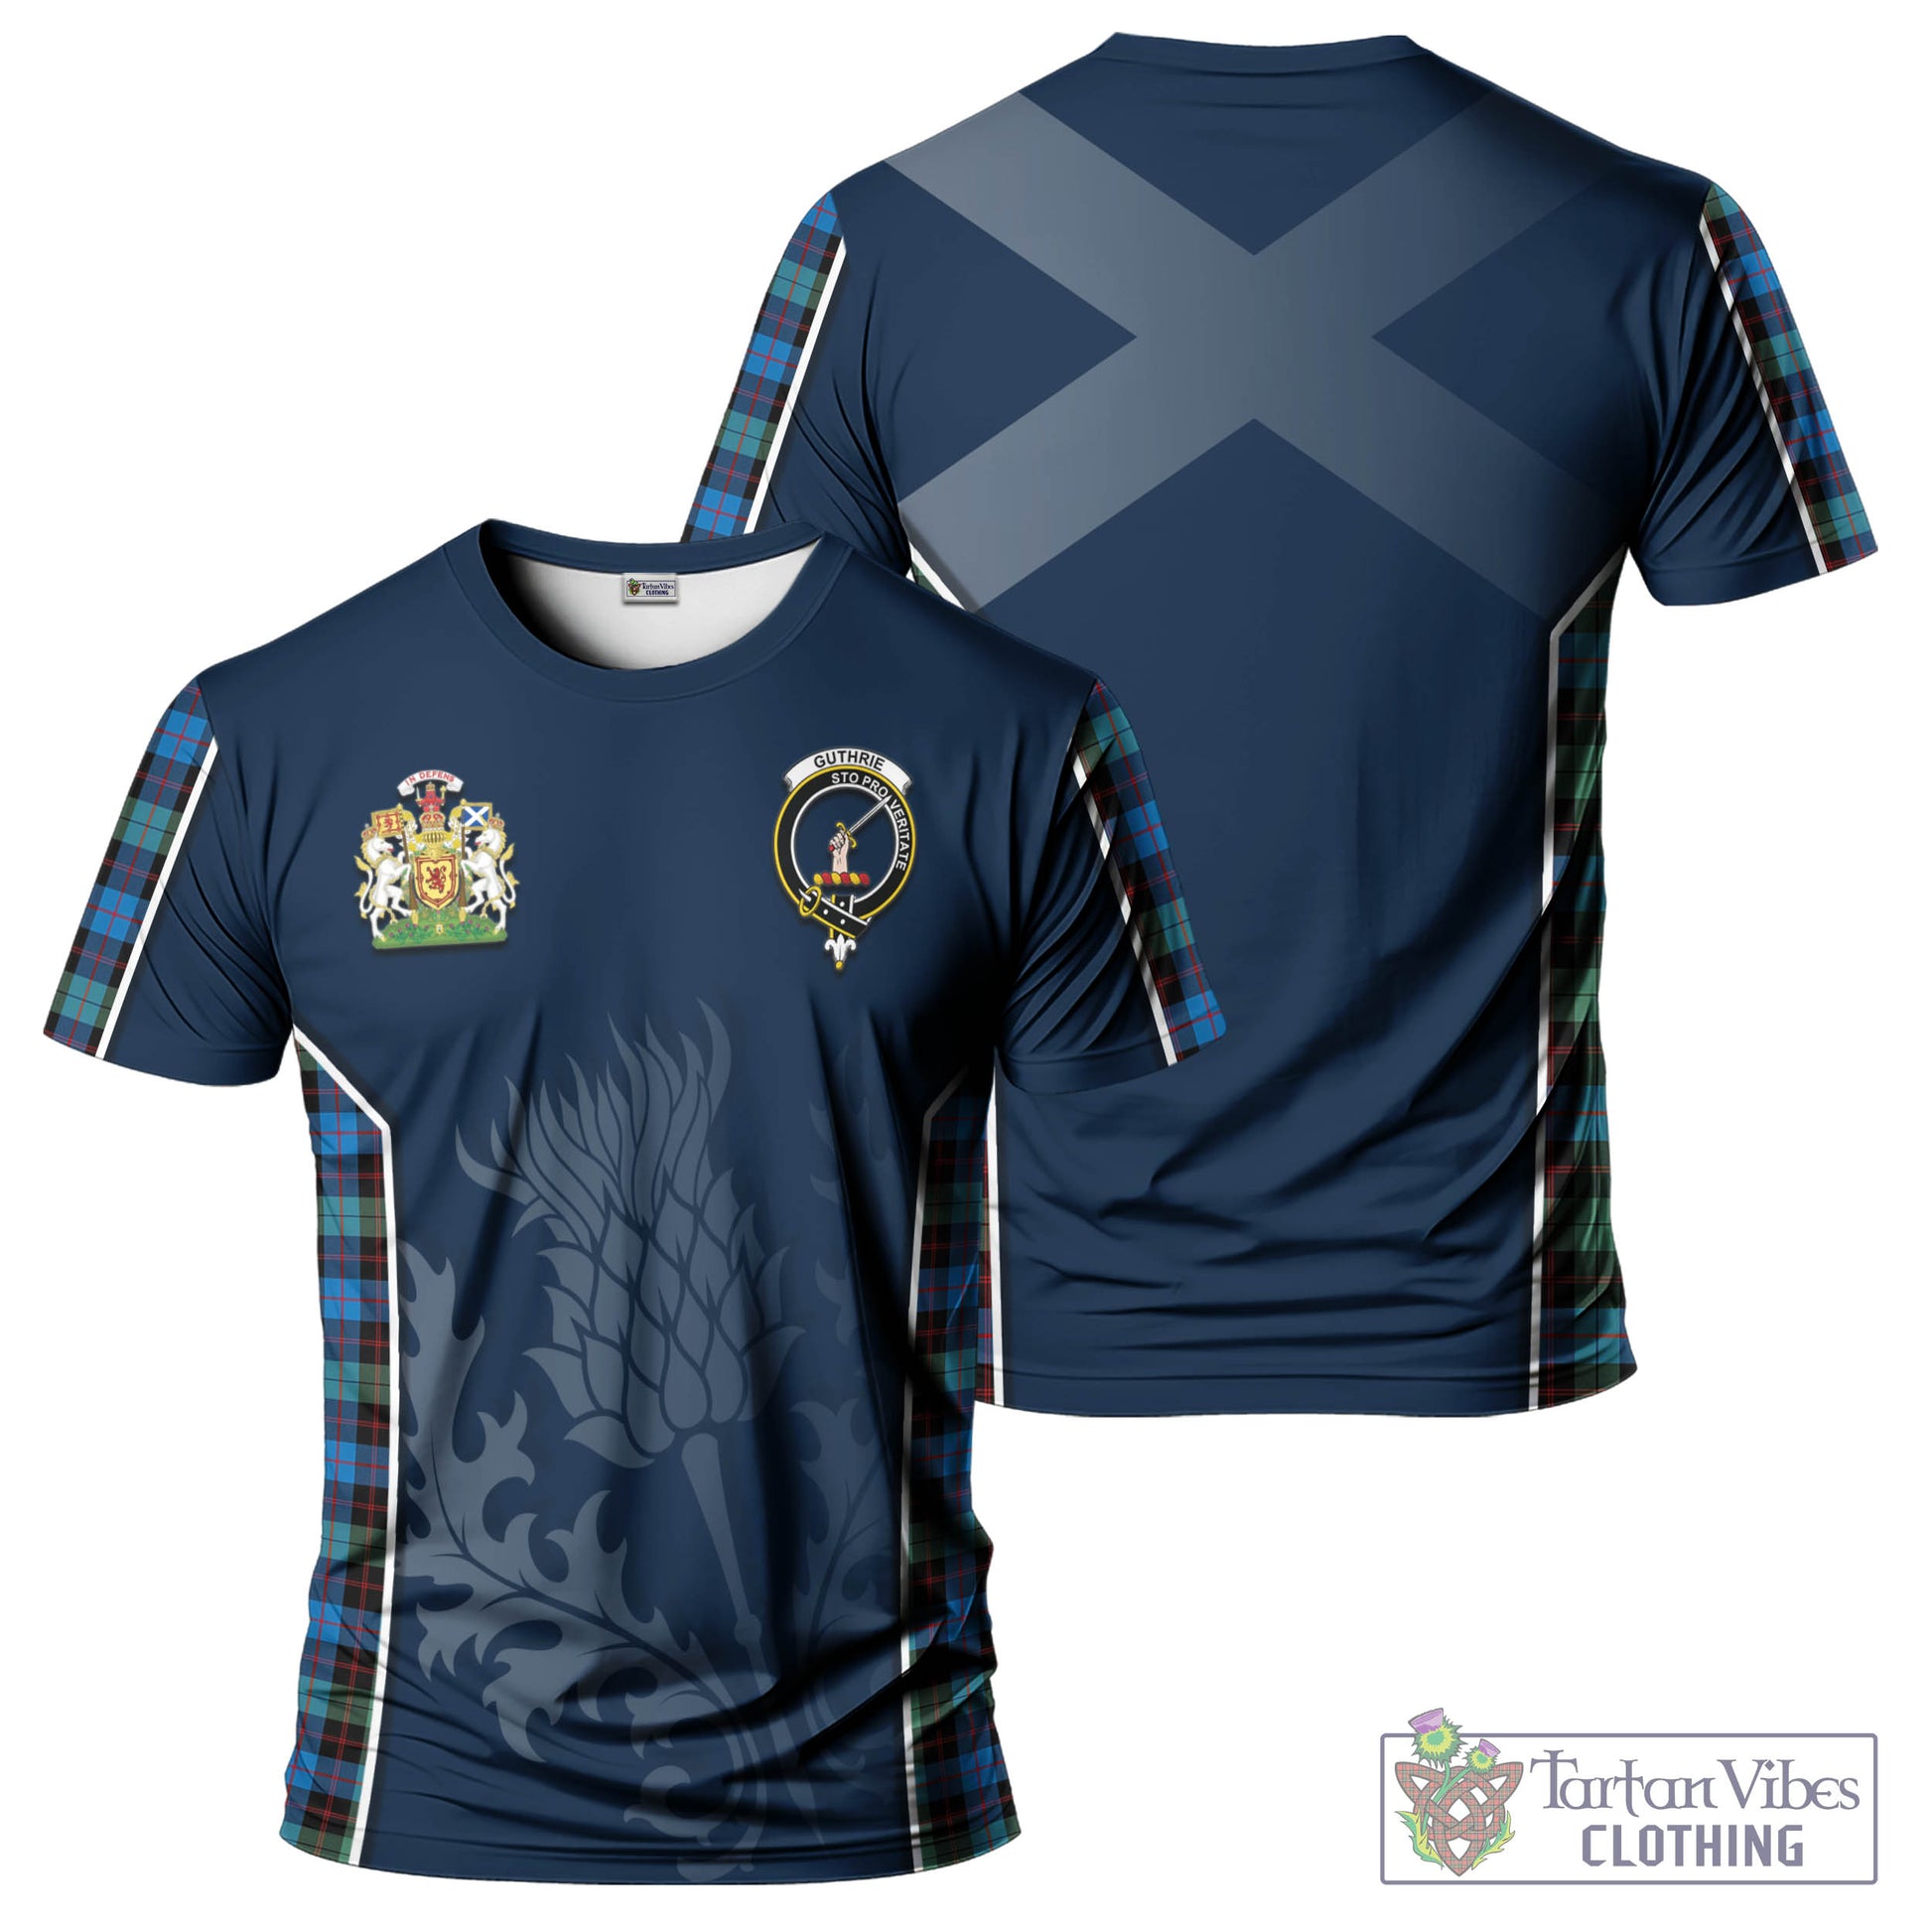 Tartan Vibes Clothing Guthrie Ancient Tartan T-Shirt with Family Crest and Scottish Thistle Vibes Sport Style